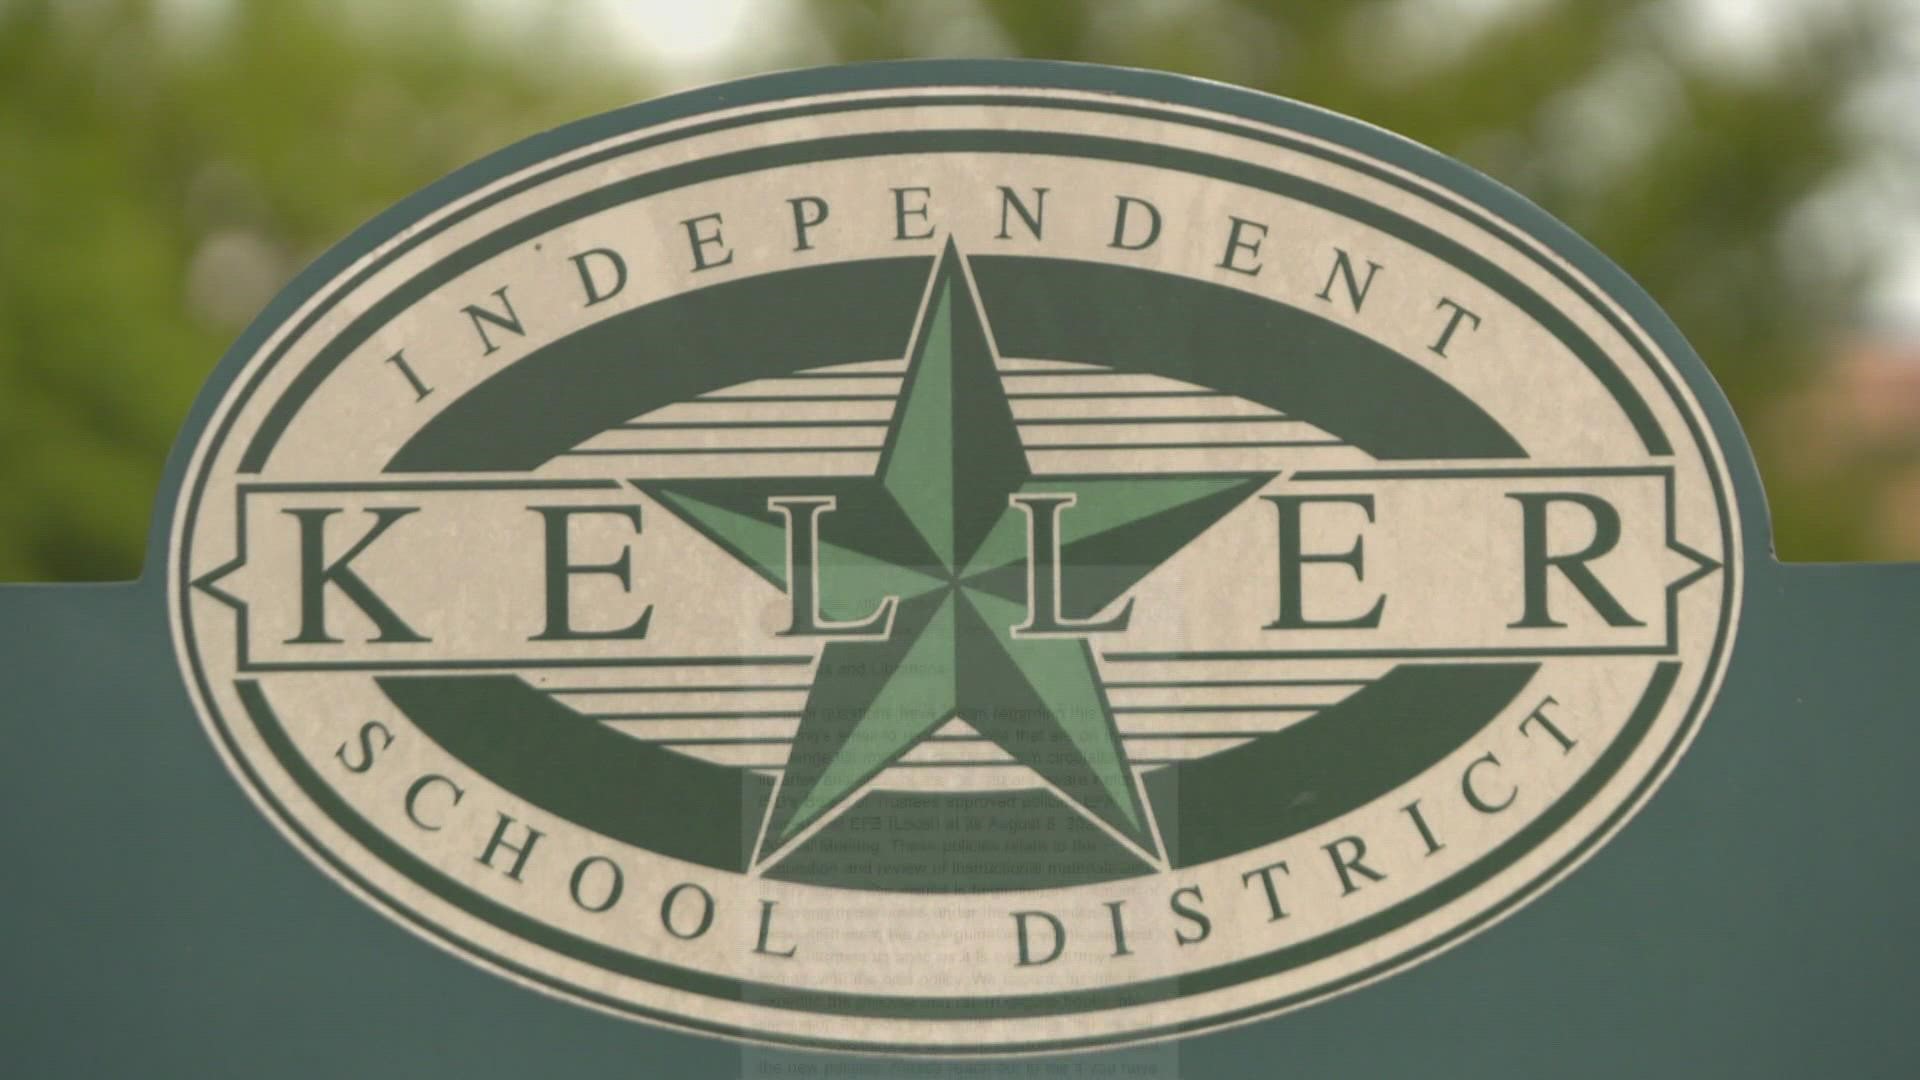 Keller ISD is now at the center of the Texas book debate after it sent an email to principals and librarians, telling them to pull 41 books for review.